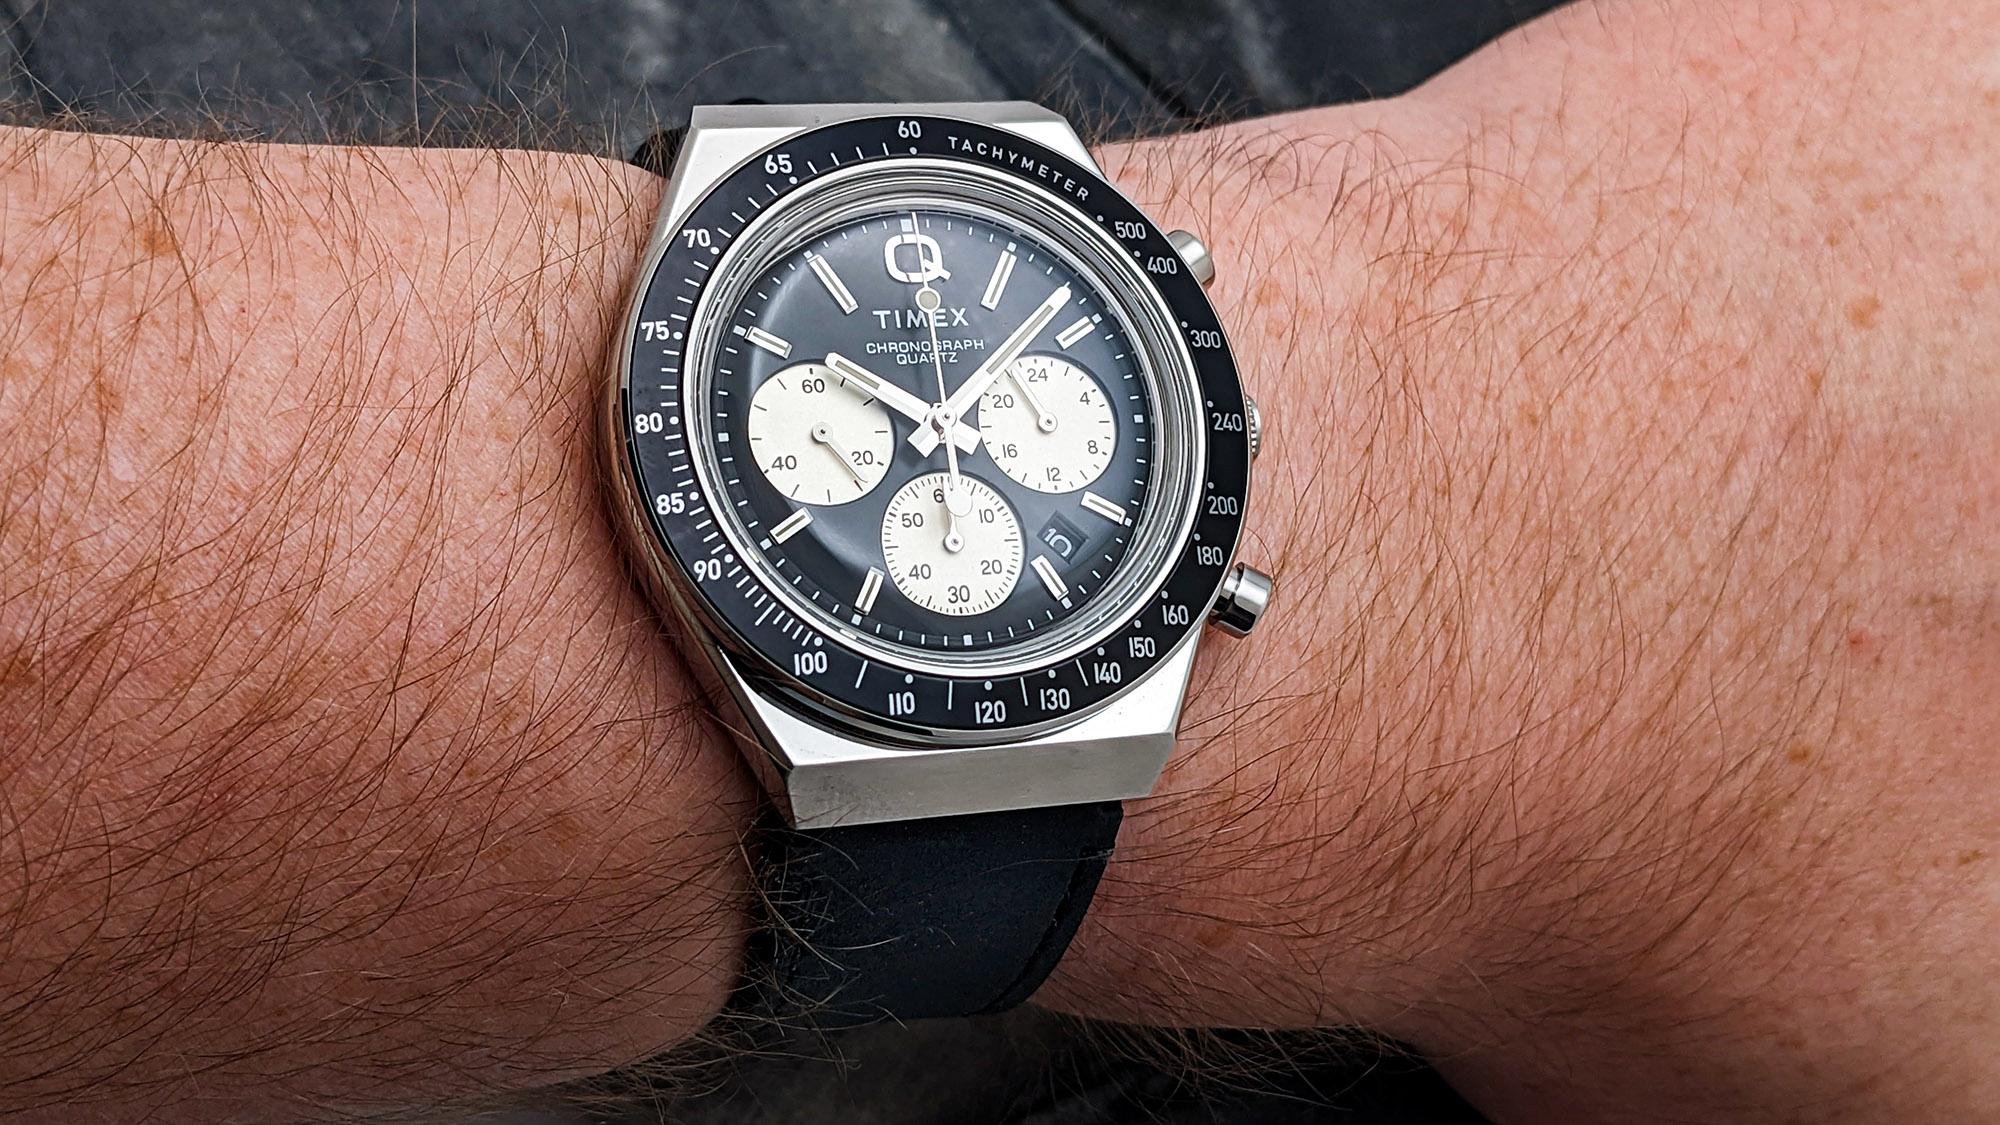 The Chronograph 1 joins the regular collection with small updates